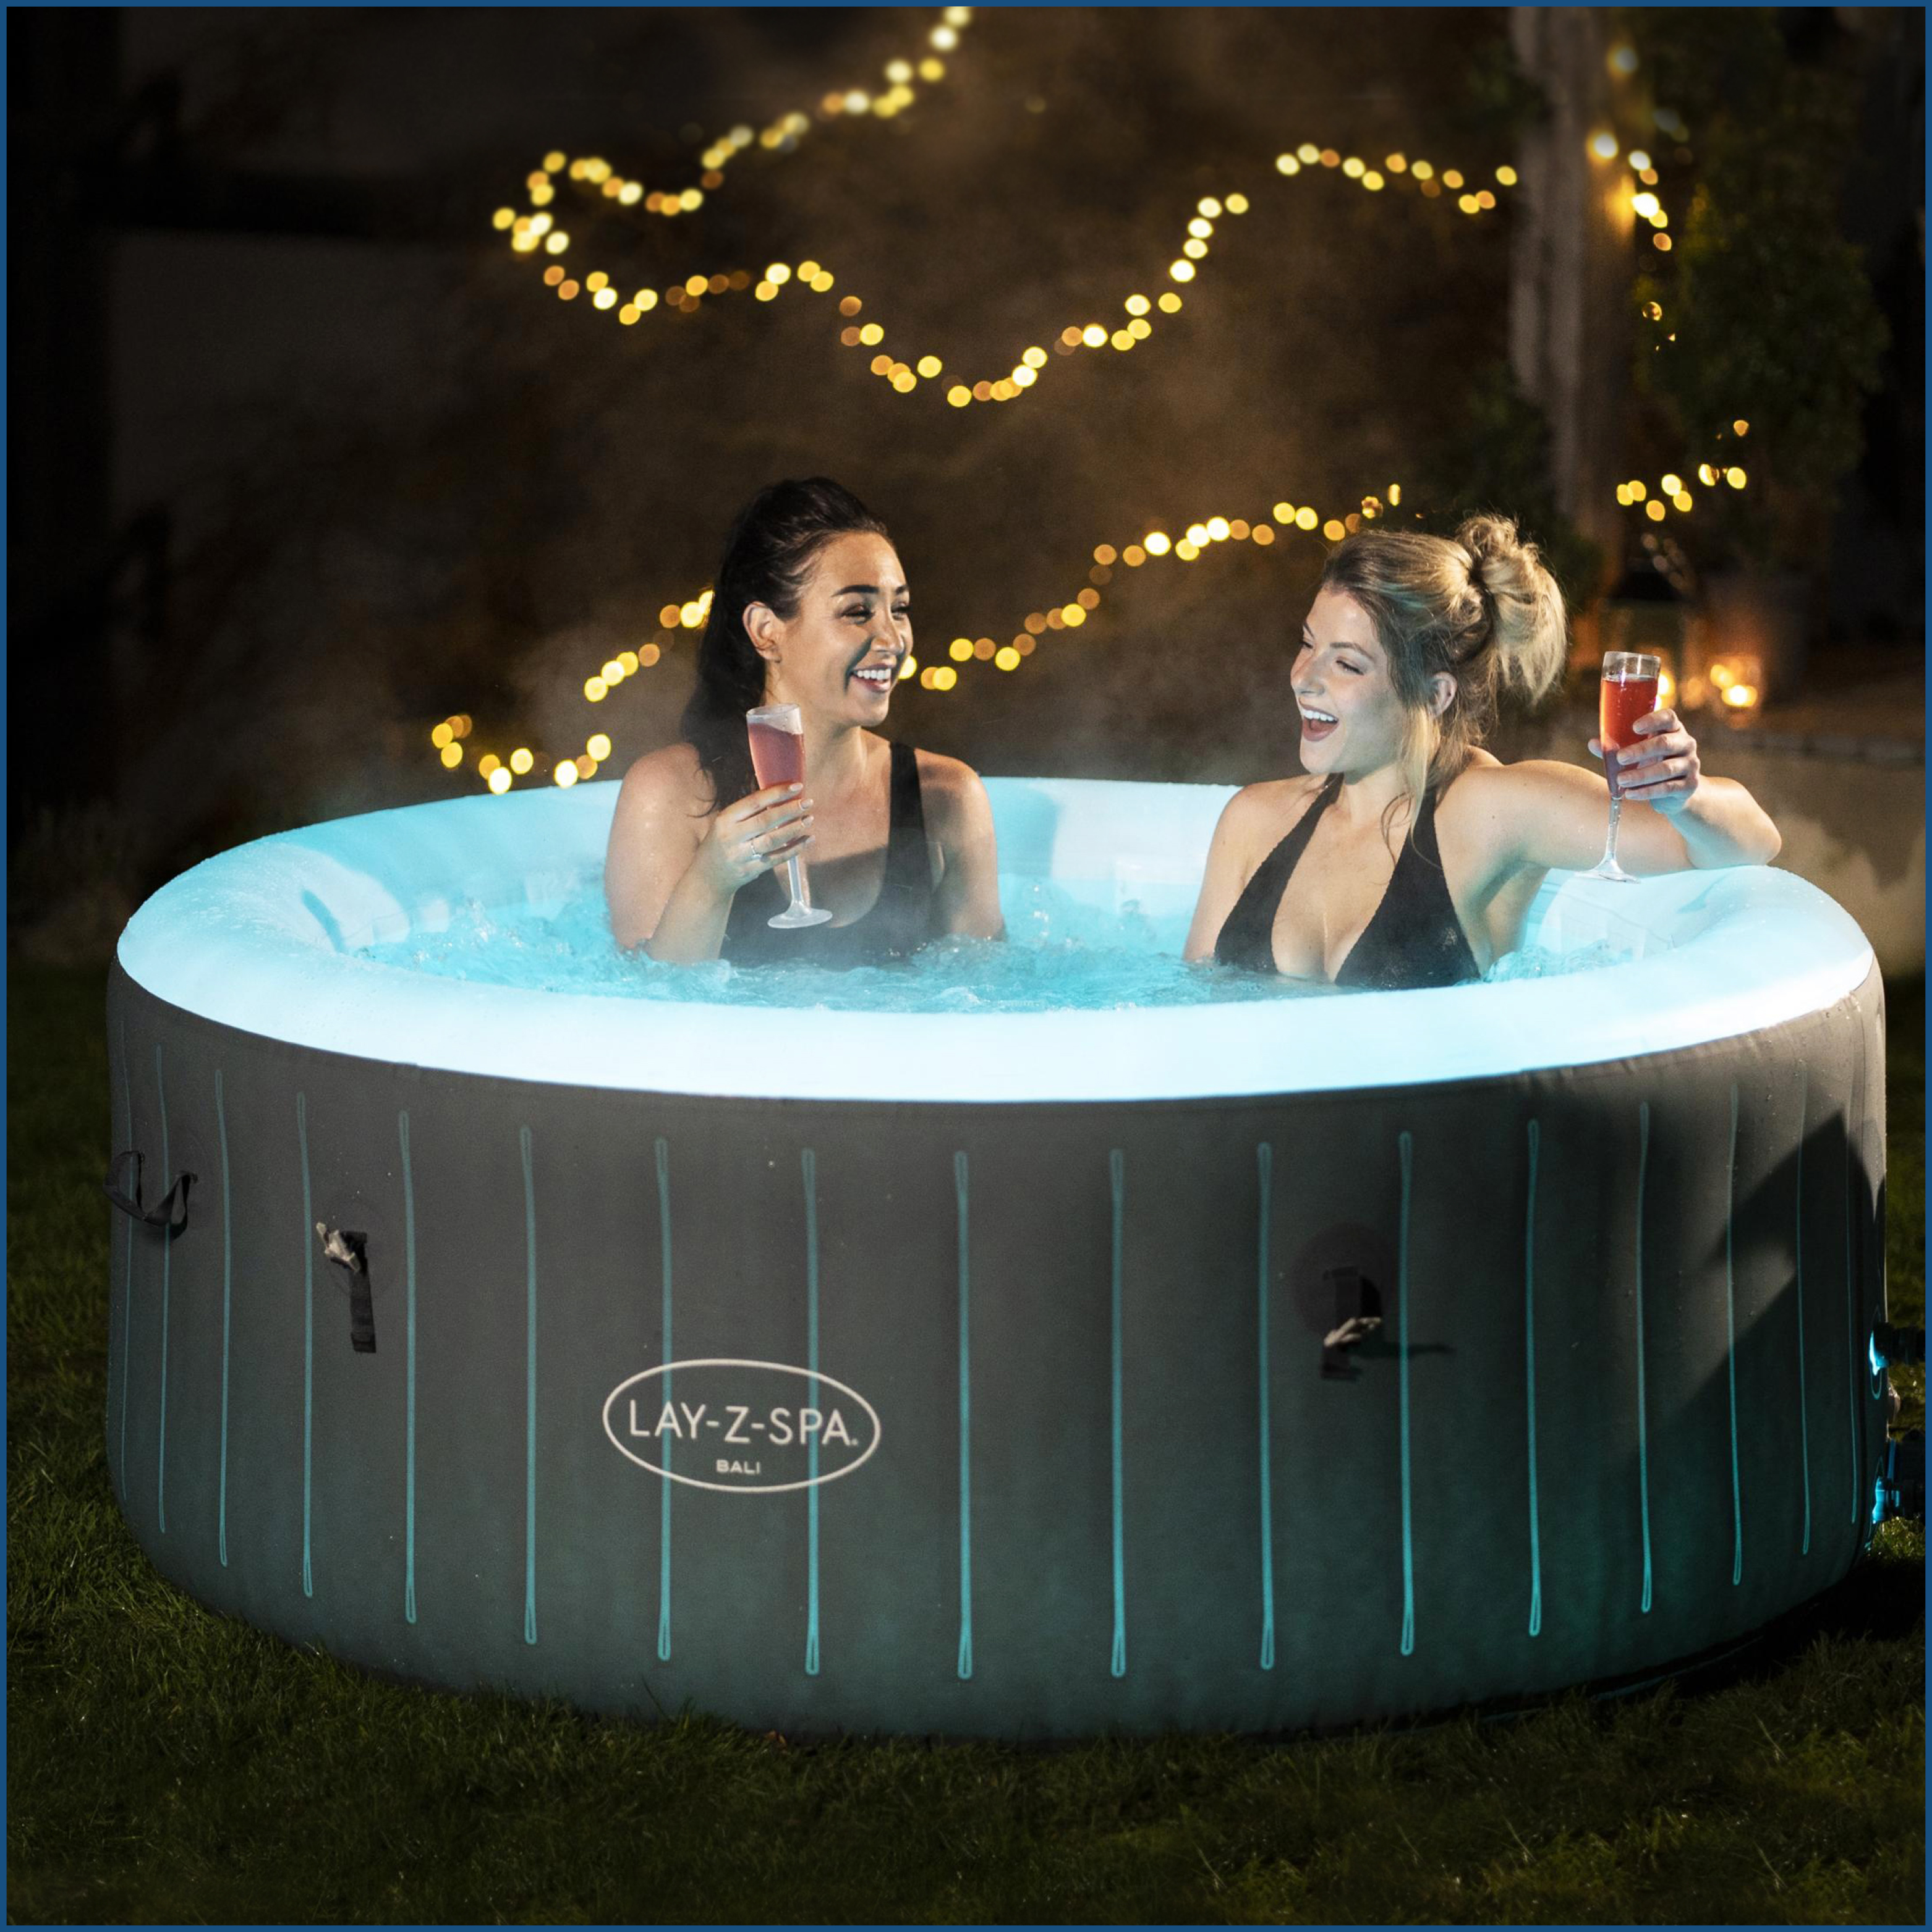 LAY-Z-SPA® LED-Whirlpool Bali x & Alle | 180 rund Lay-Z-Spa Ø Whirlpools | cm, Zubehör Whirlpools Whirlpools 66 AirJet™ 